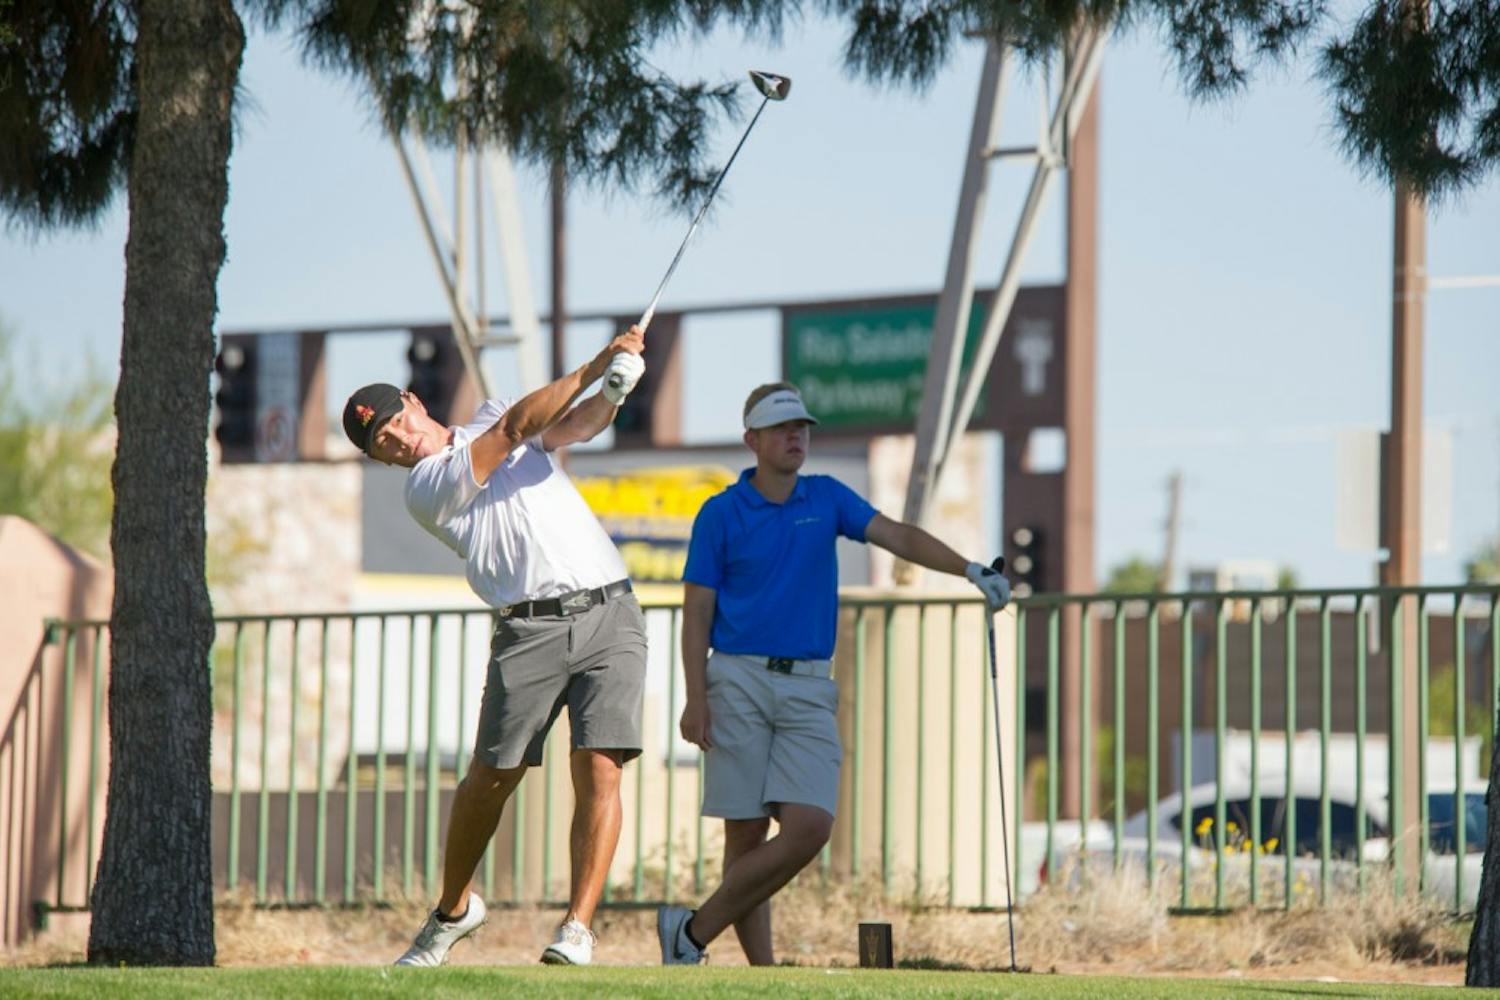 Senior Ki Taek Lee tees off from hole 17 during the second round of Saturday play during the ASU Thunderbird Invitational on Saturday, April 2, 2016 at Karsten Golf Course in Tempe, AZ.